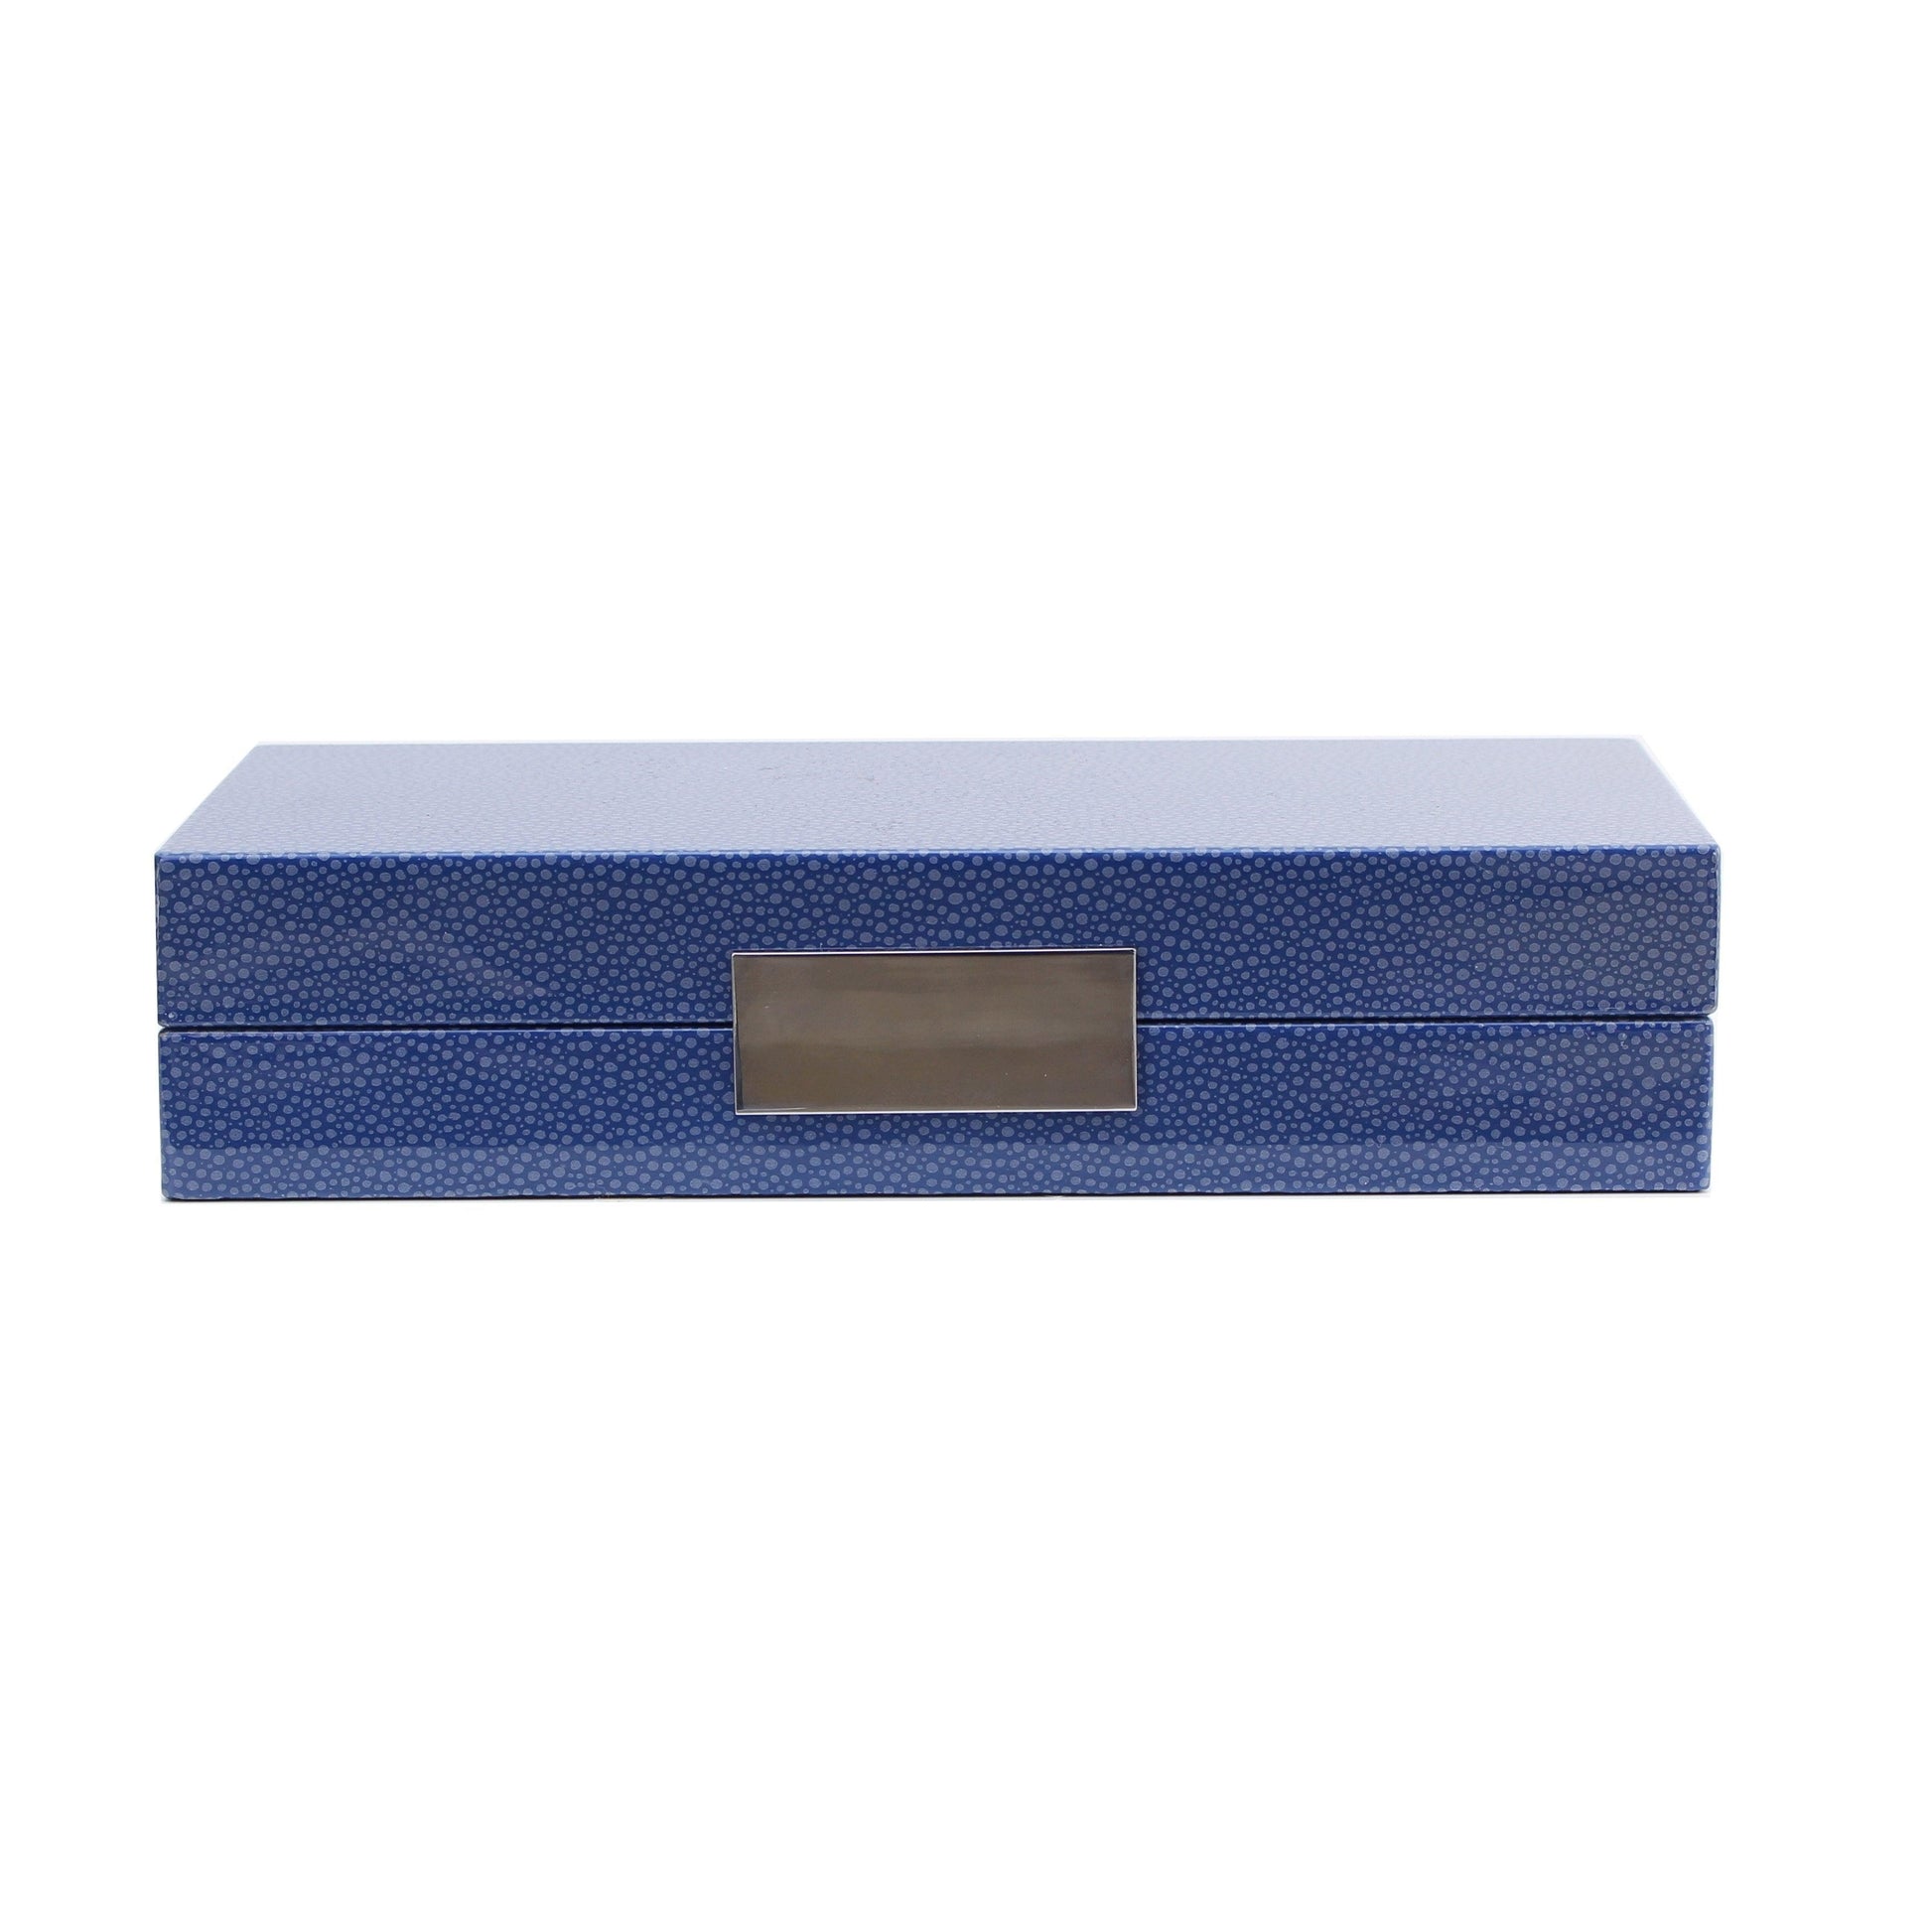 Addison Ross 4x9 Blue & Silver Shagreen Jewelry Box by Addison Ross